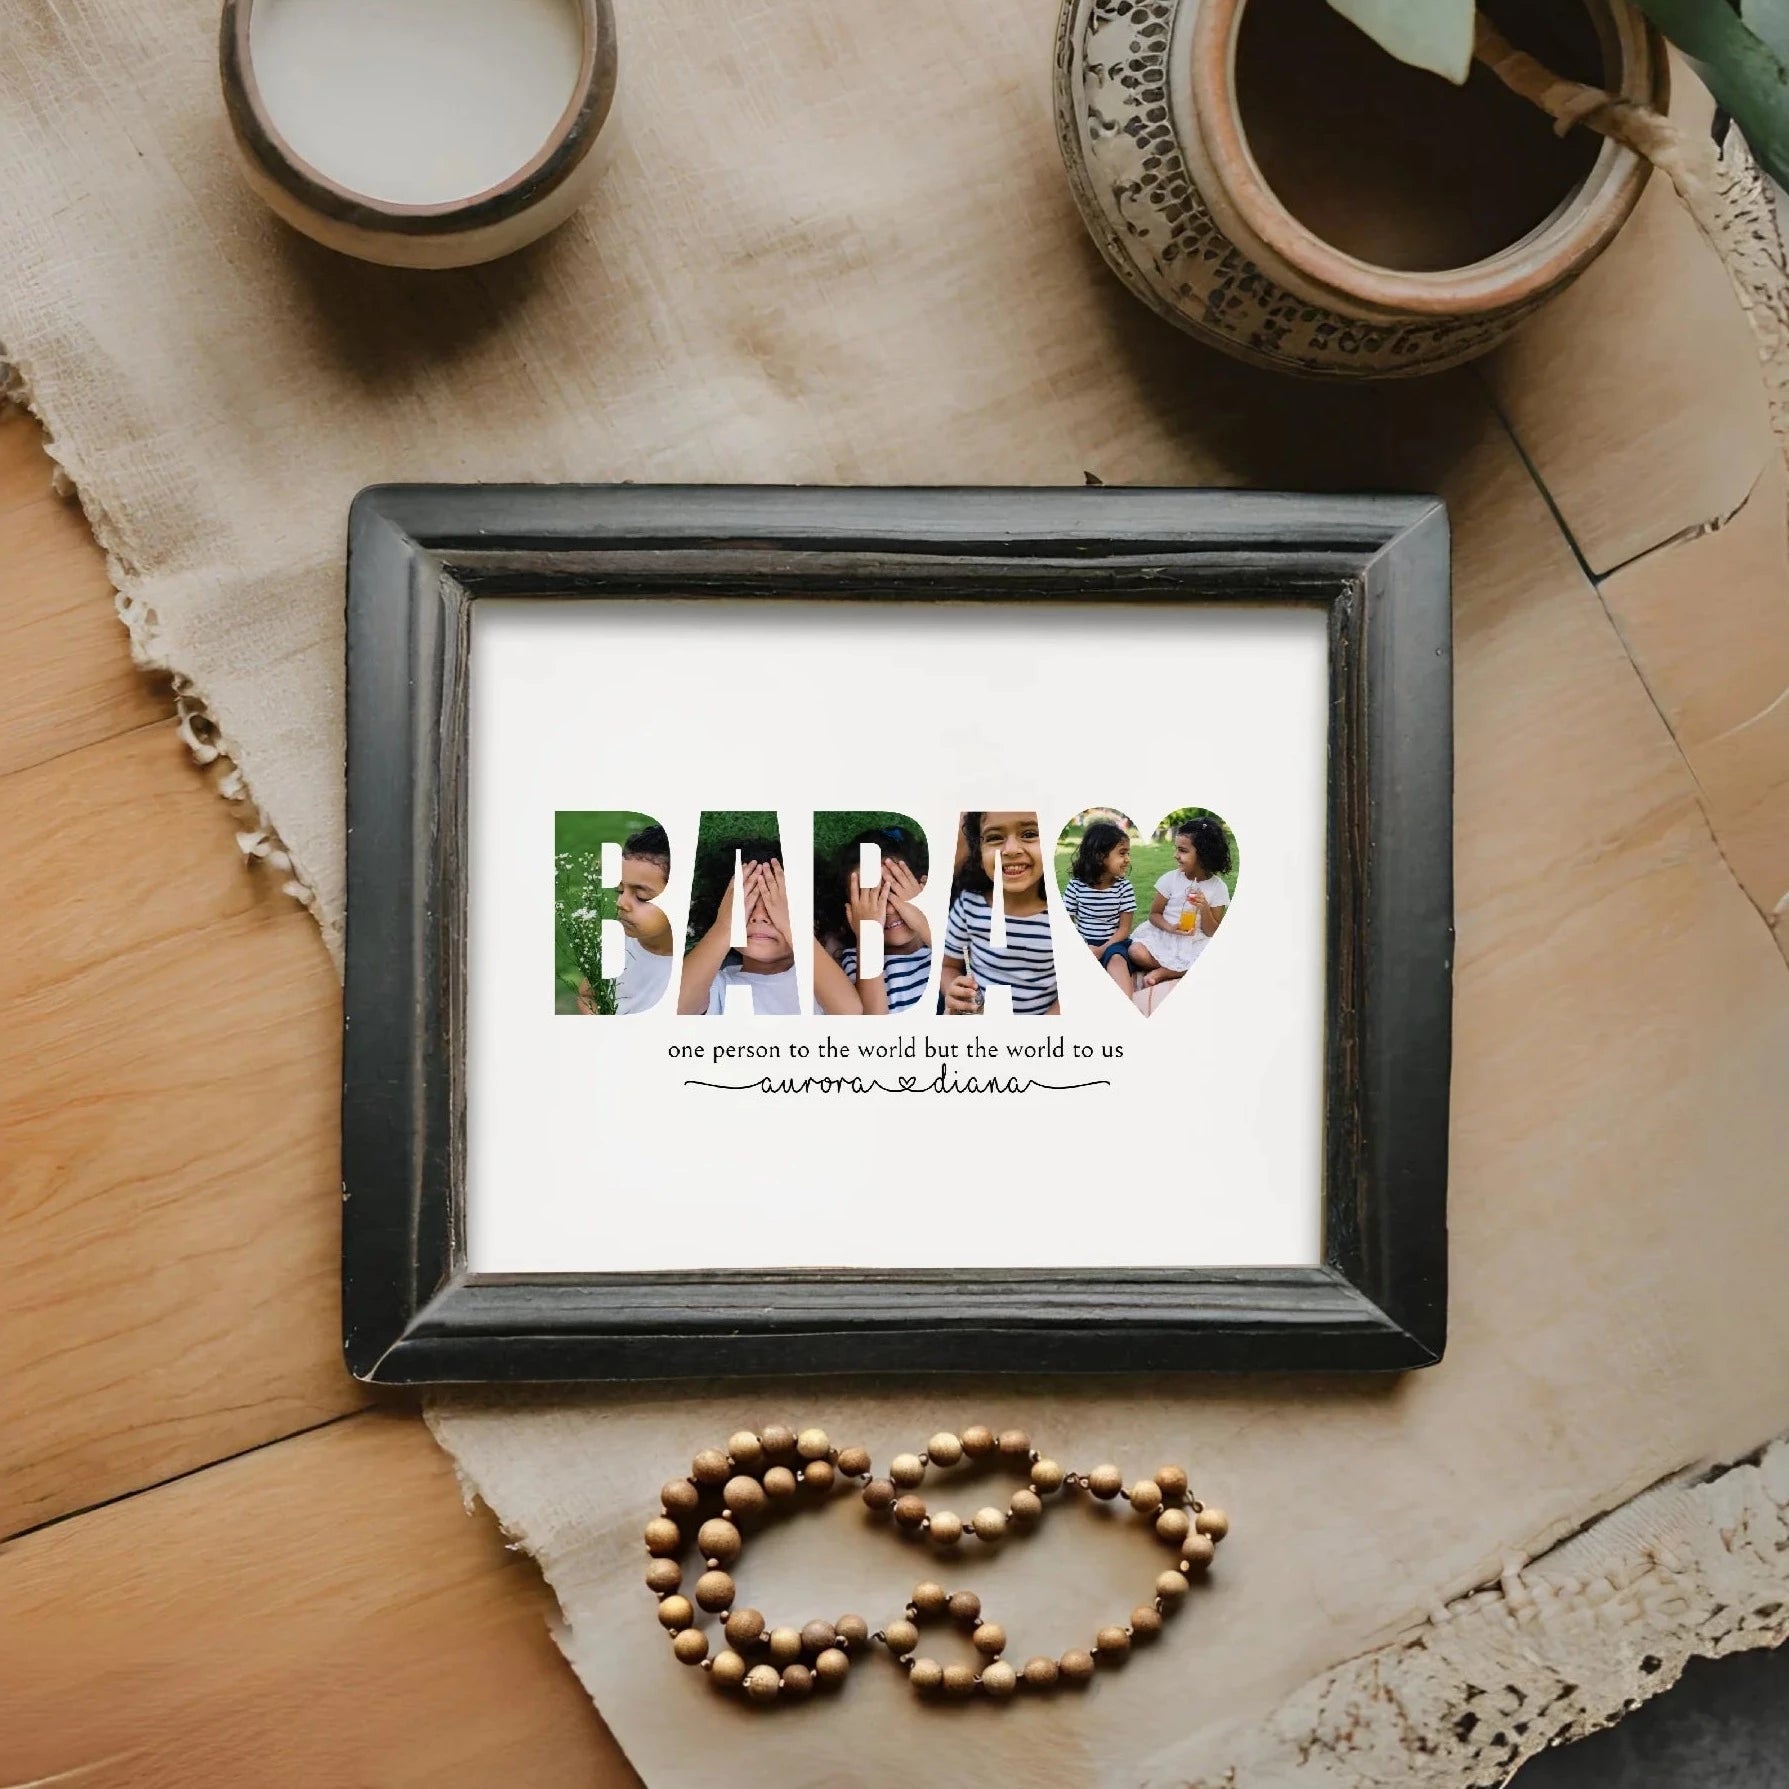 Editable Baba Photo Collage Template Personalized Gift by Playful Pixie Studio